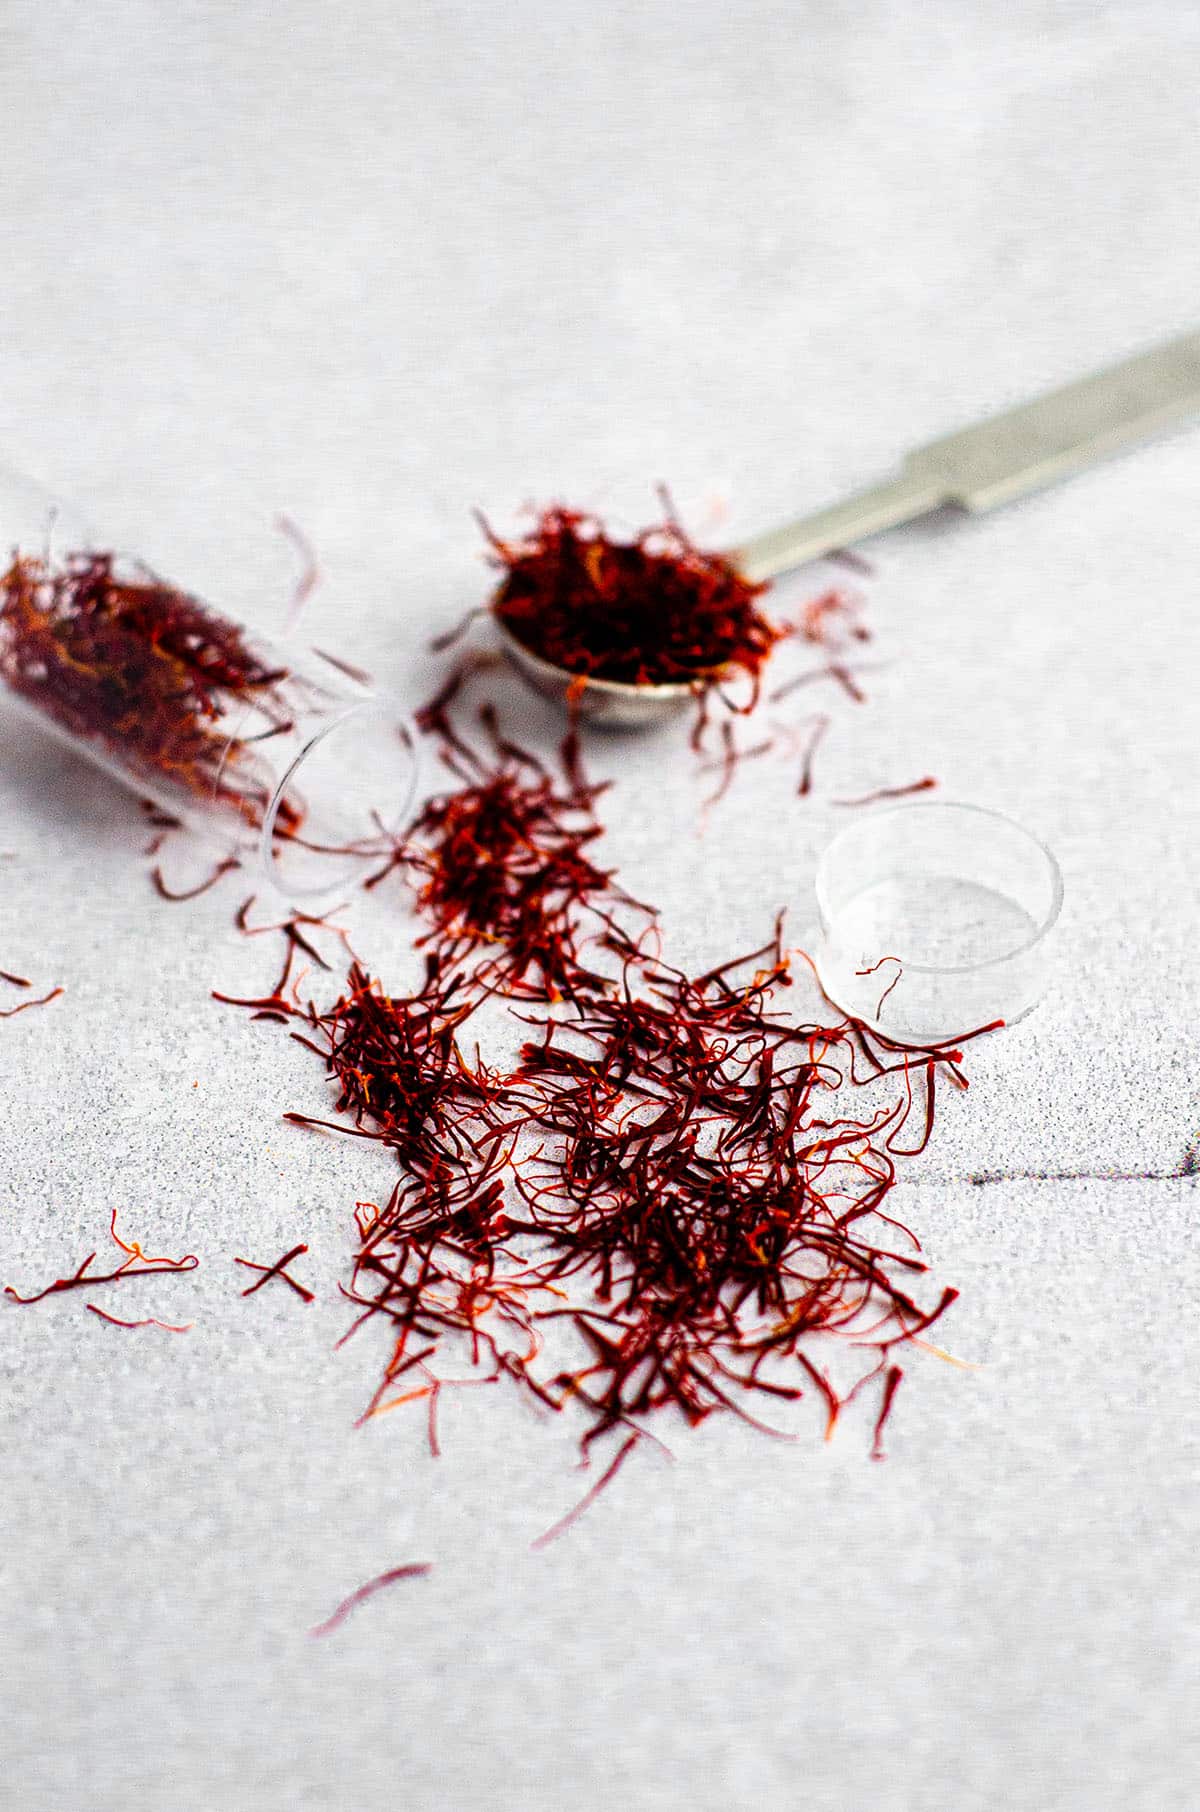 saffron threads spilling out of a tube